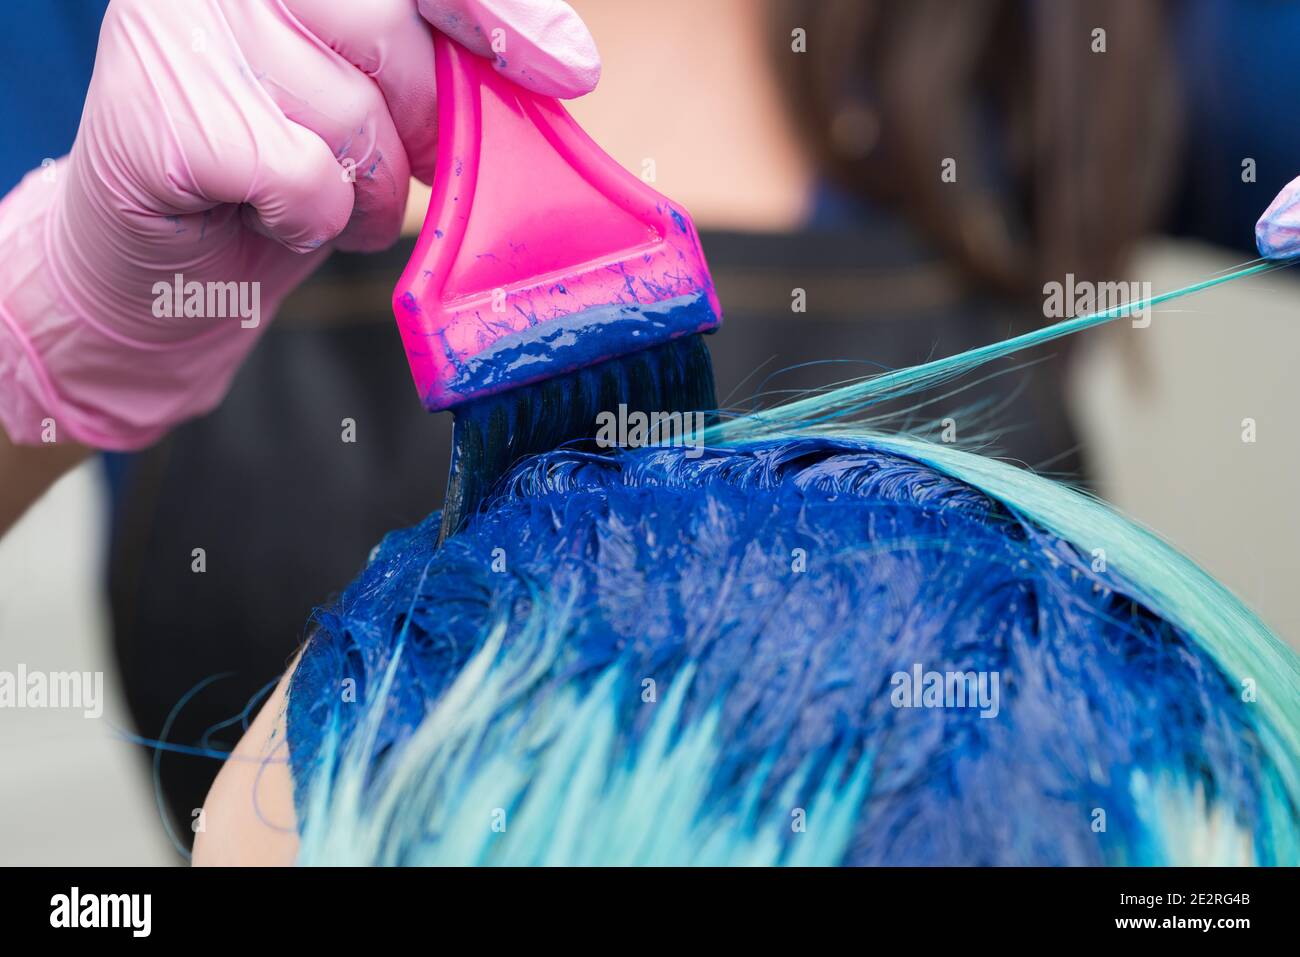 5. "Step-by-Step Guide for Dyeing Your Hair from Pink to Blue" - wide 4